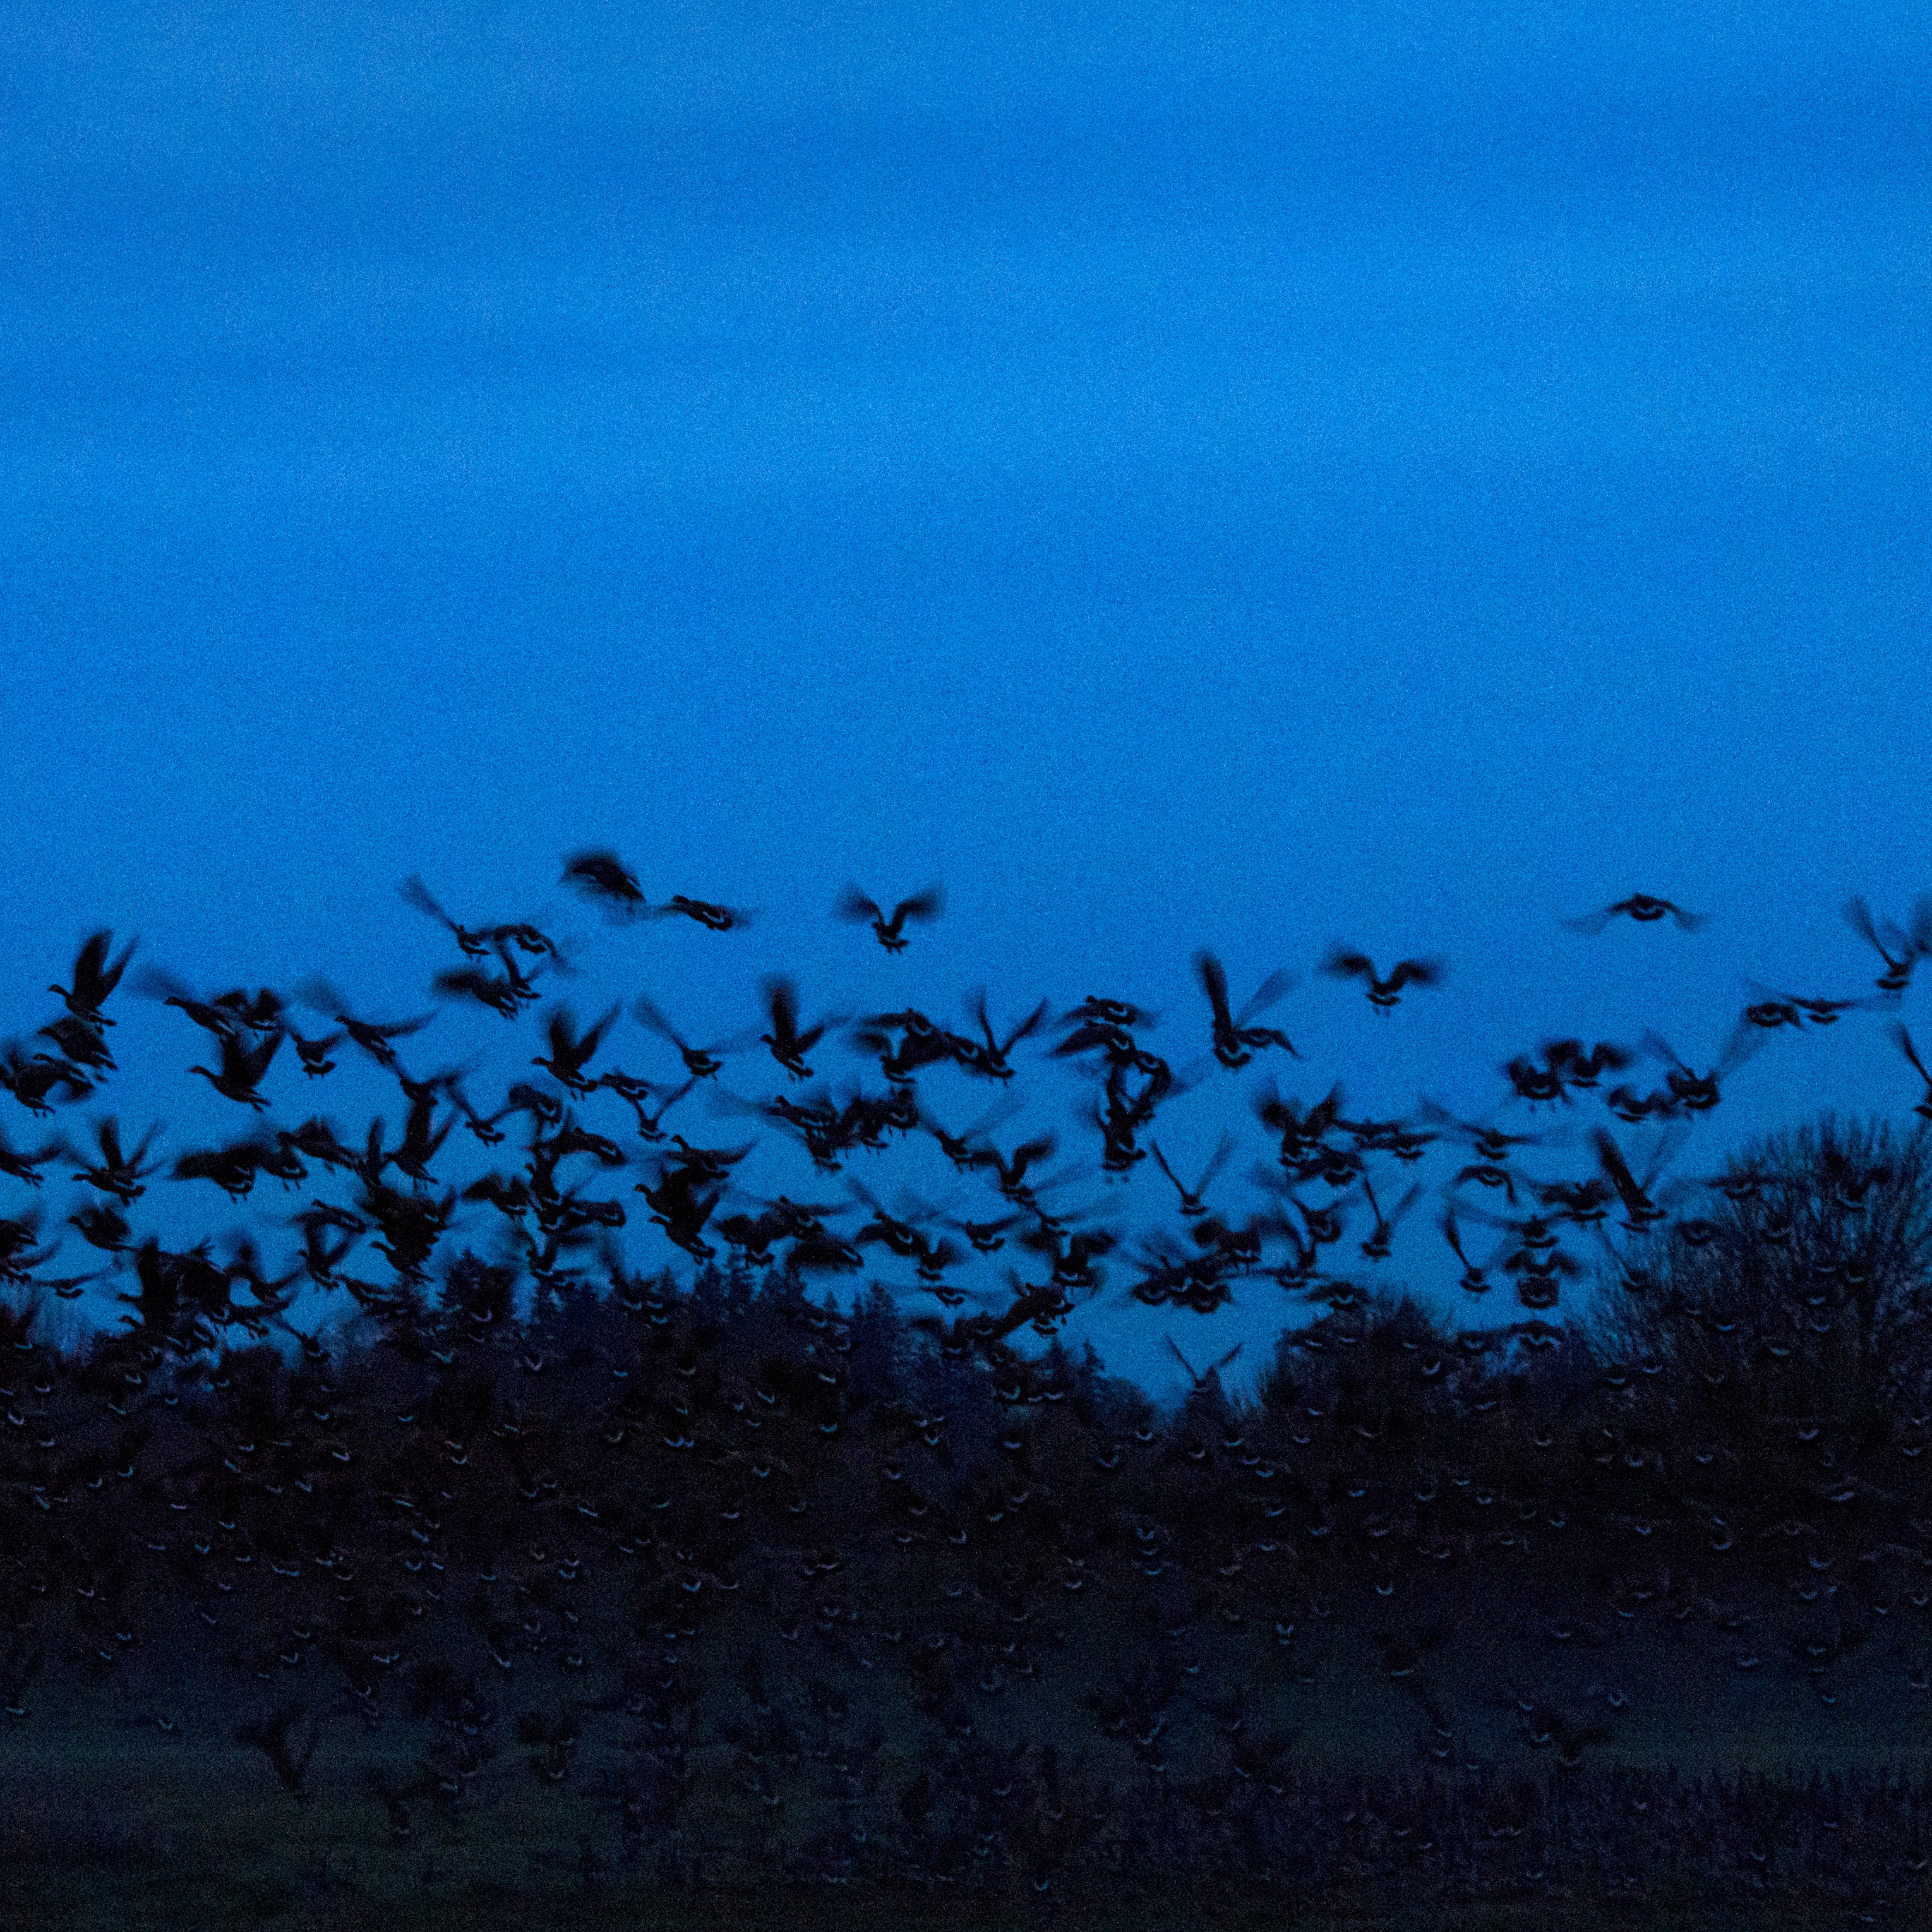 Geese Taking Flight, photo by artist Emily Miller